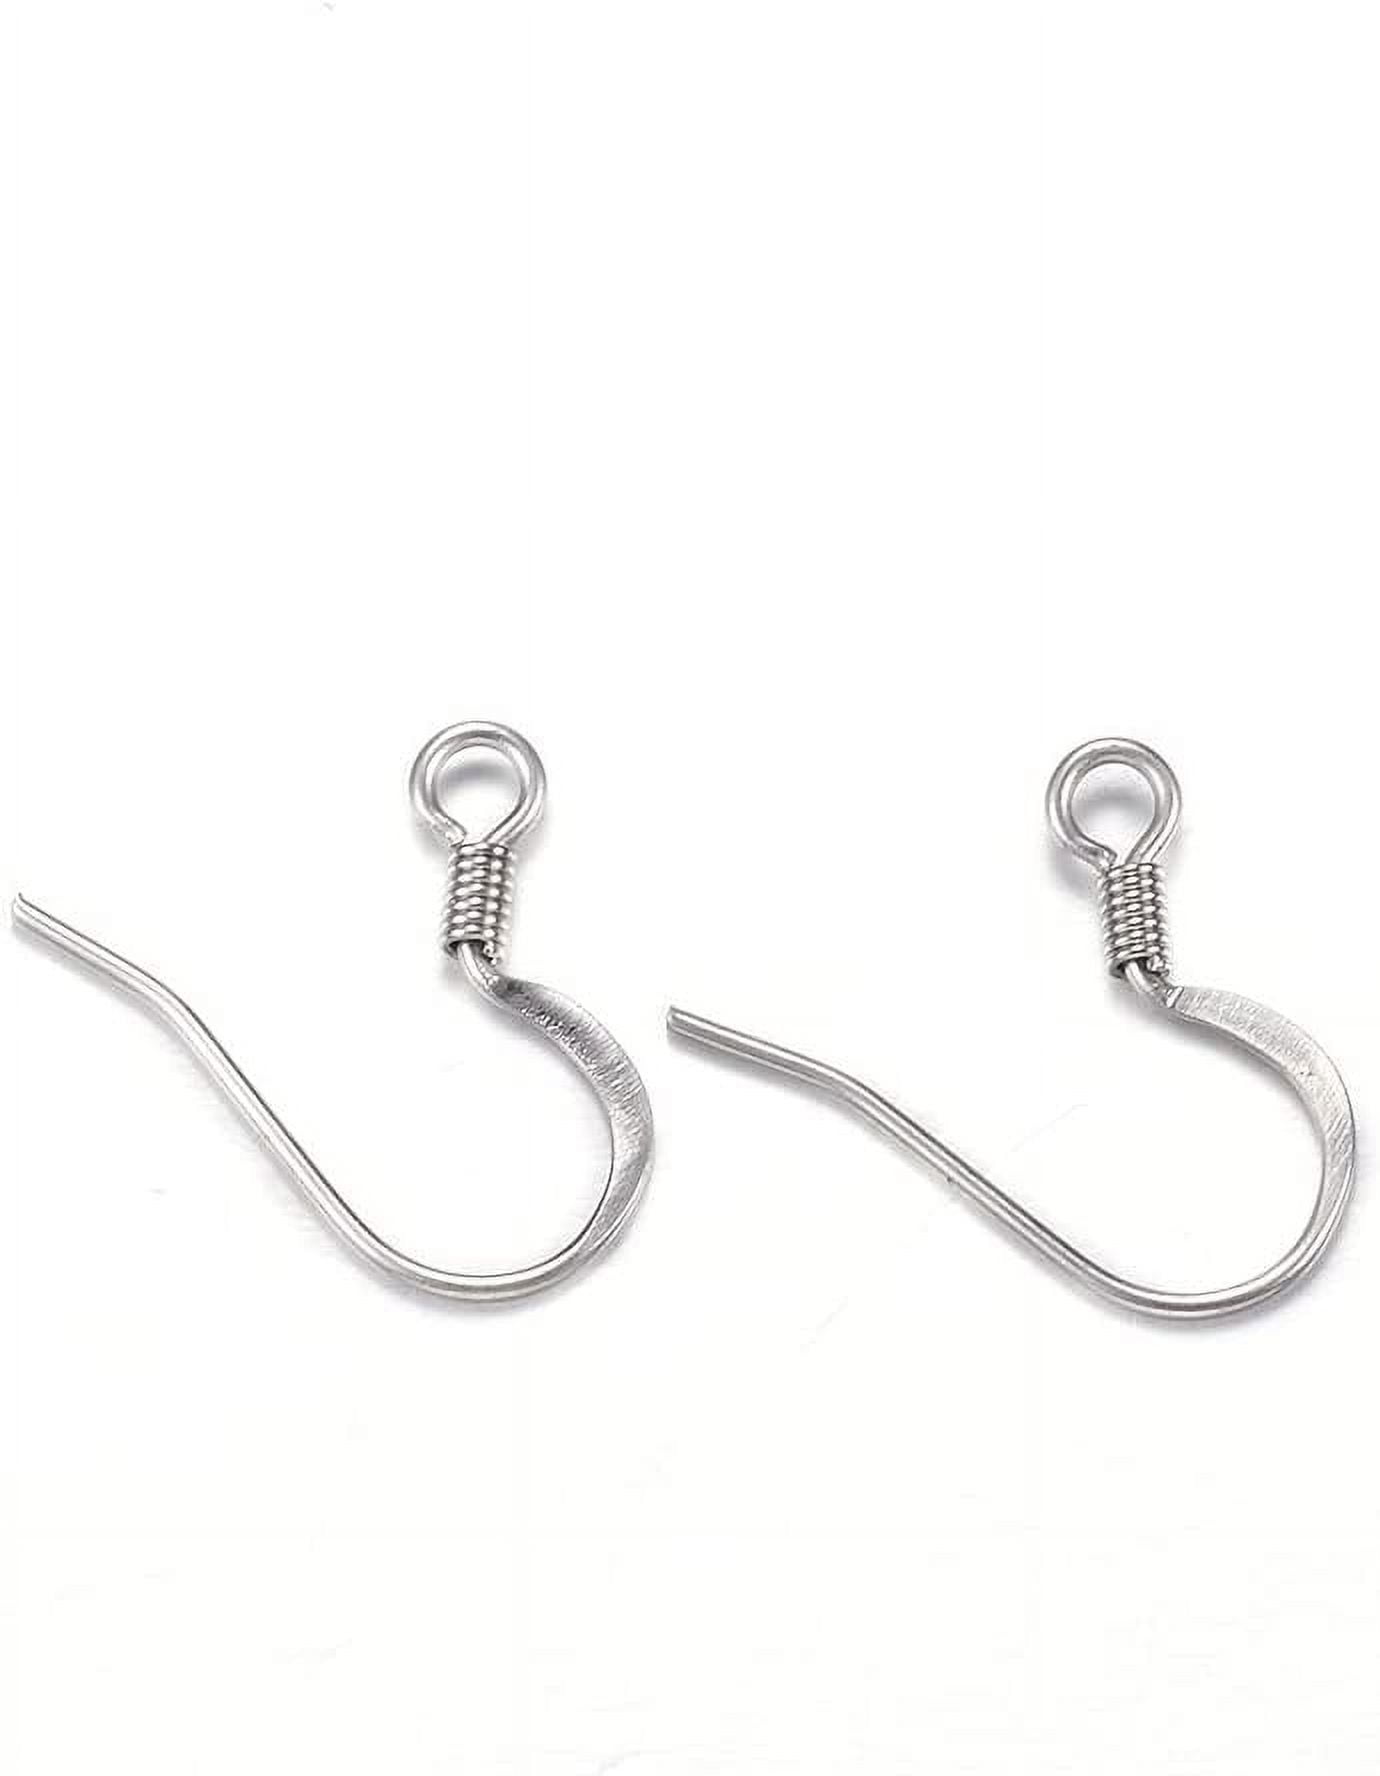 Pandahall 100pcs 304 Stainless Steel Earring Hooks Findings 18x15x0.8mm  Fish Hooks Ear Wires with Loop for Earring Jewelry Making